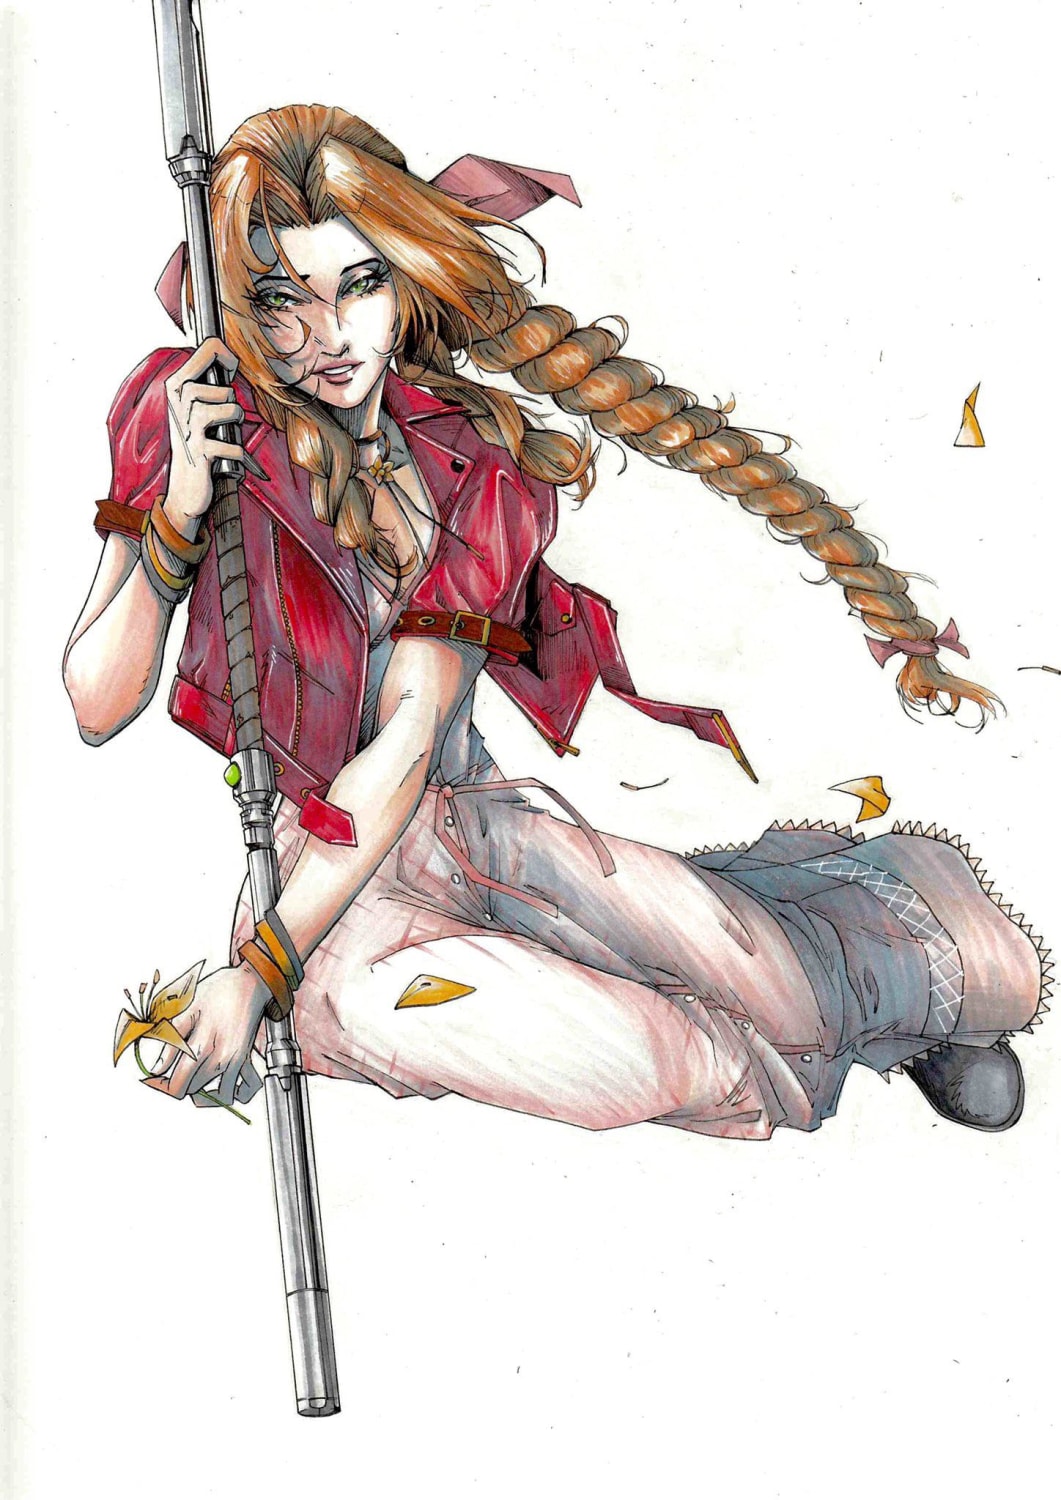 Commission of aerith by me done traditionally!